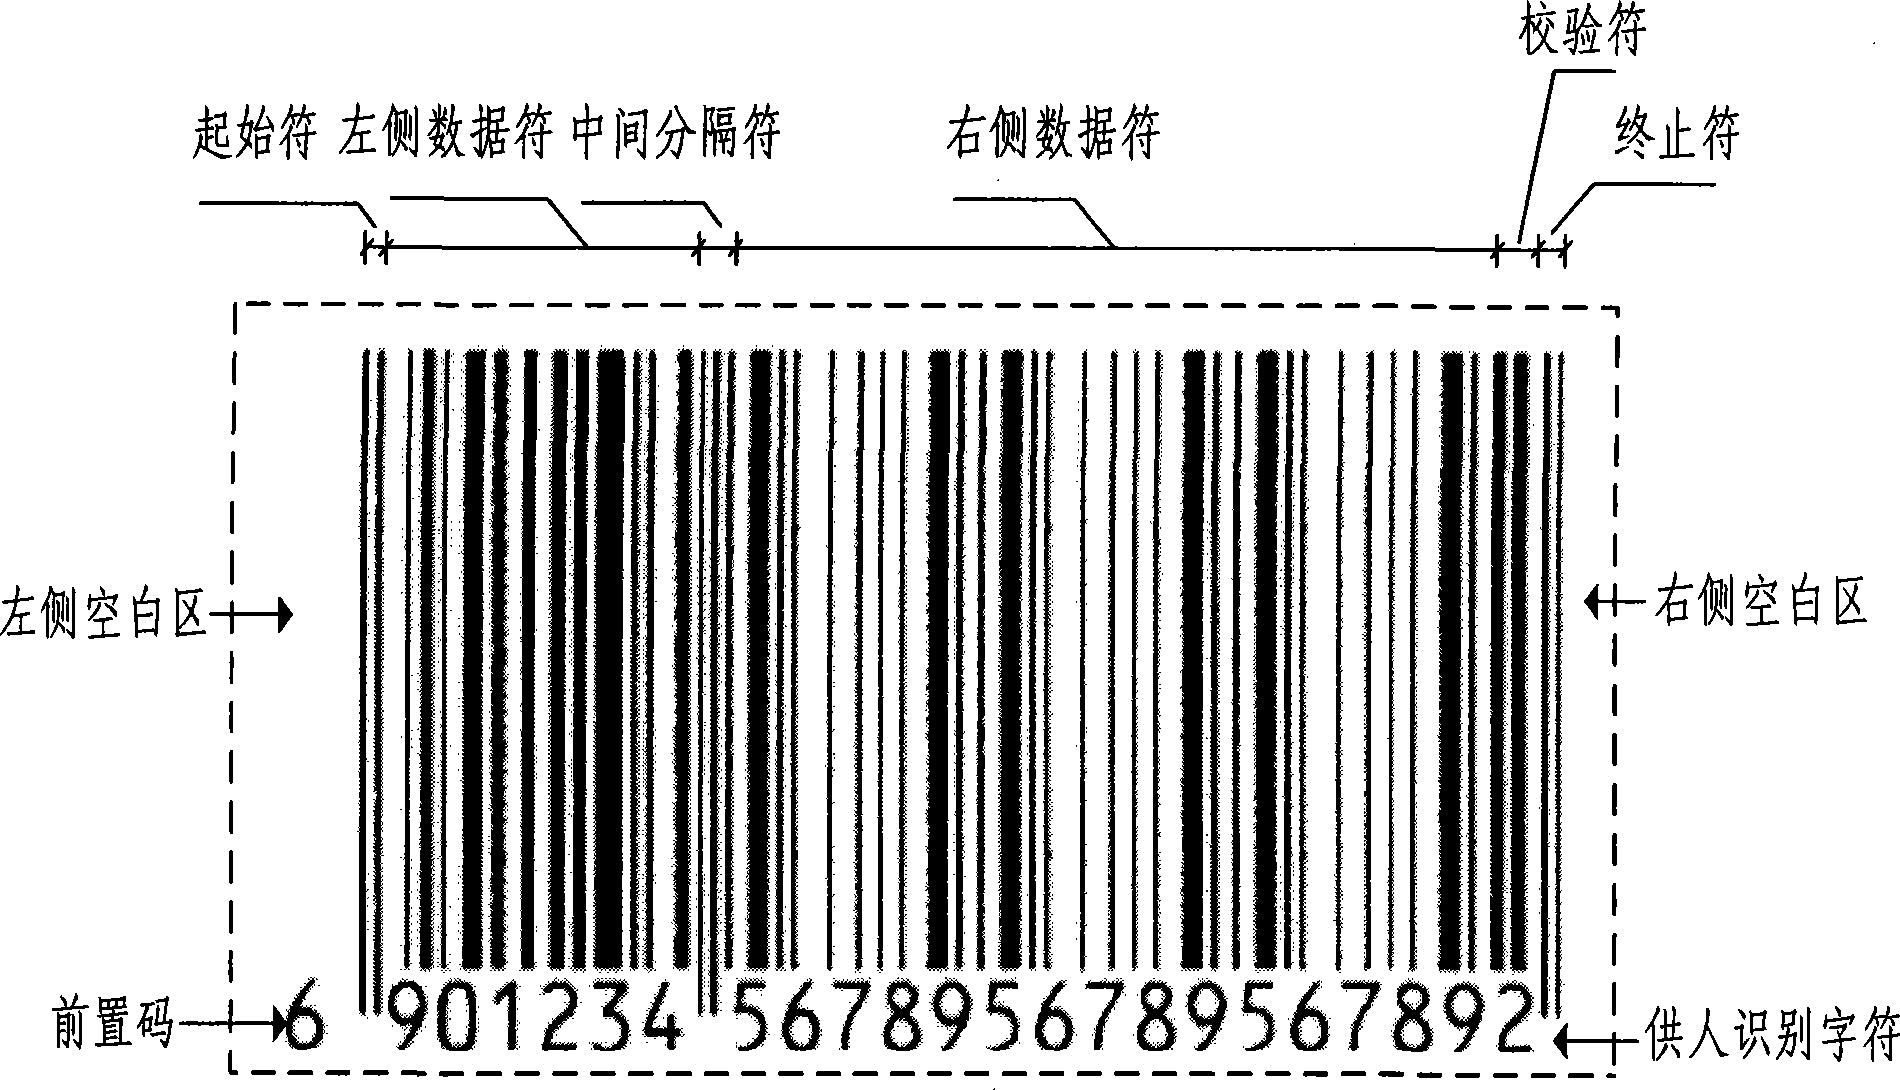 Method for determining uniqueness of electronic documents by using electronic barcode